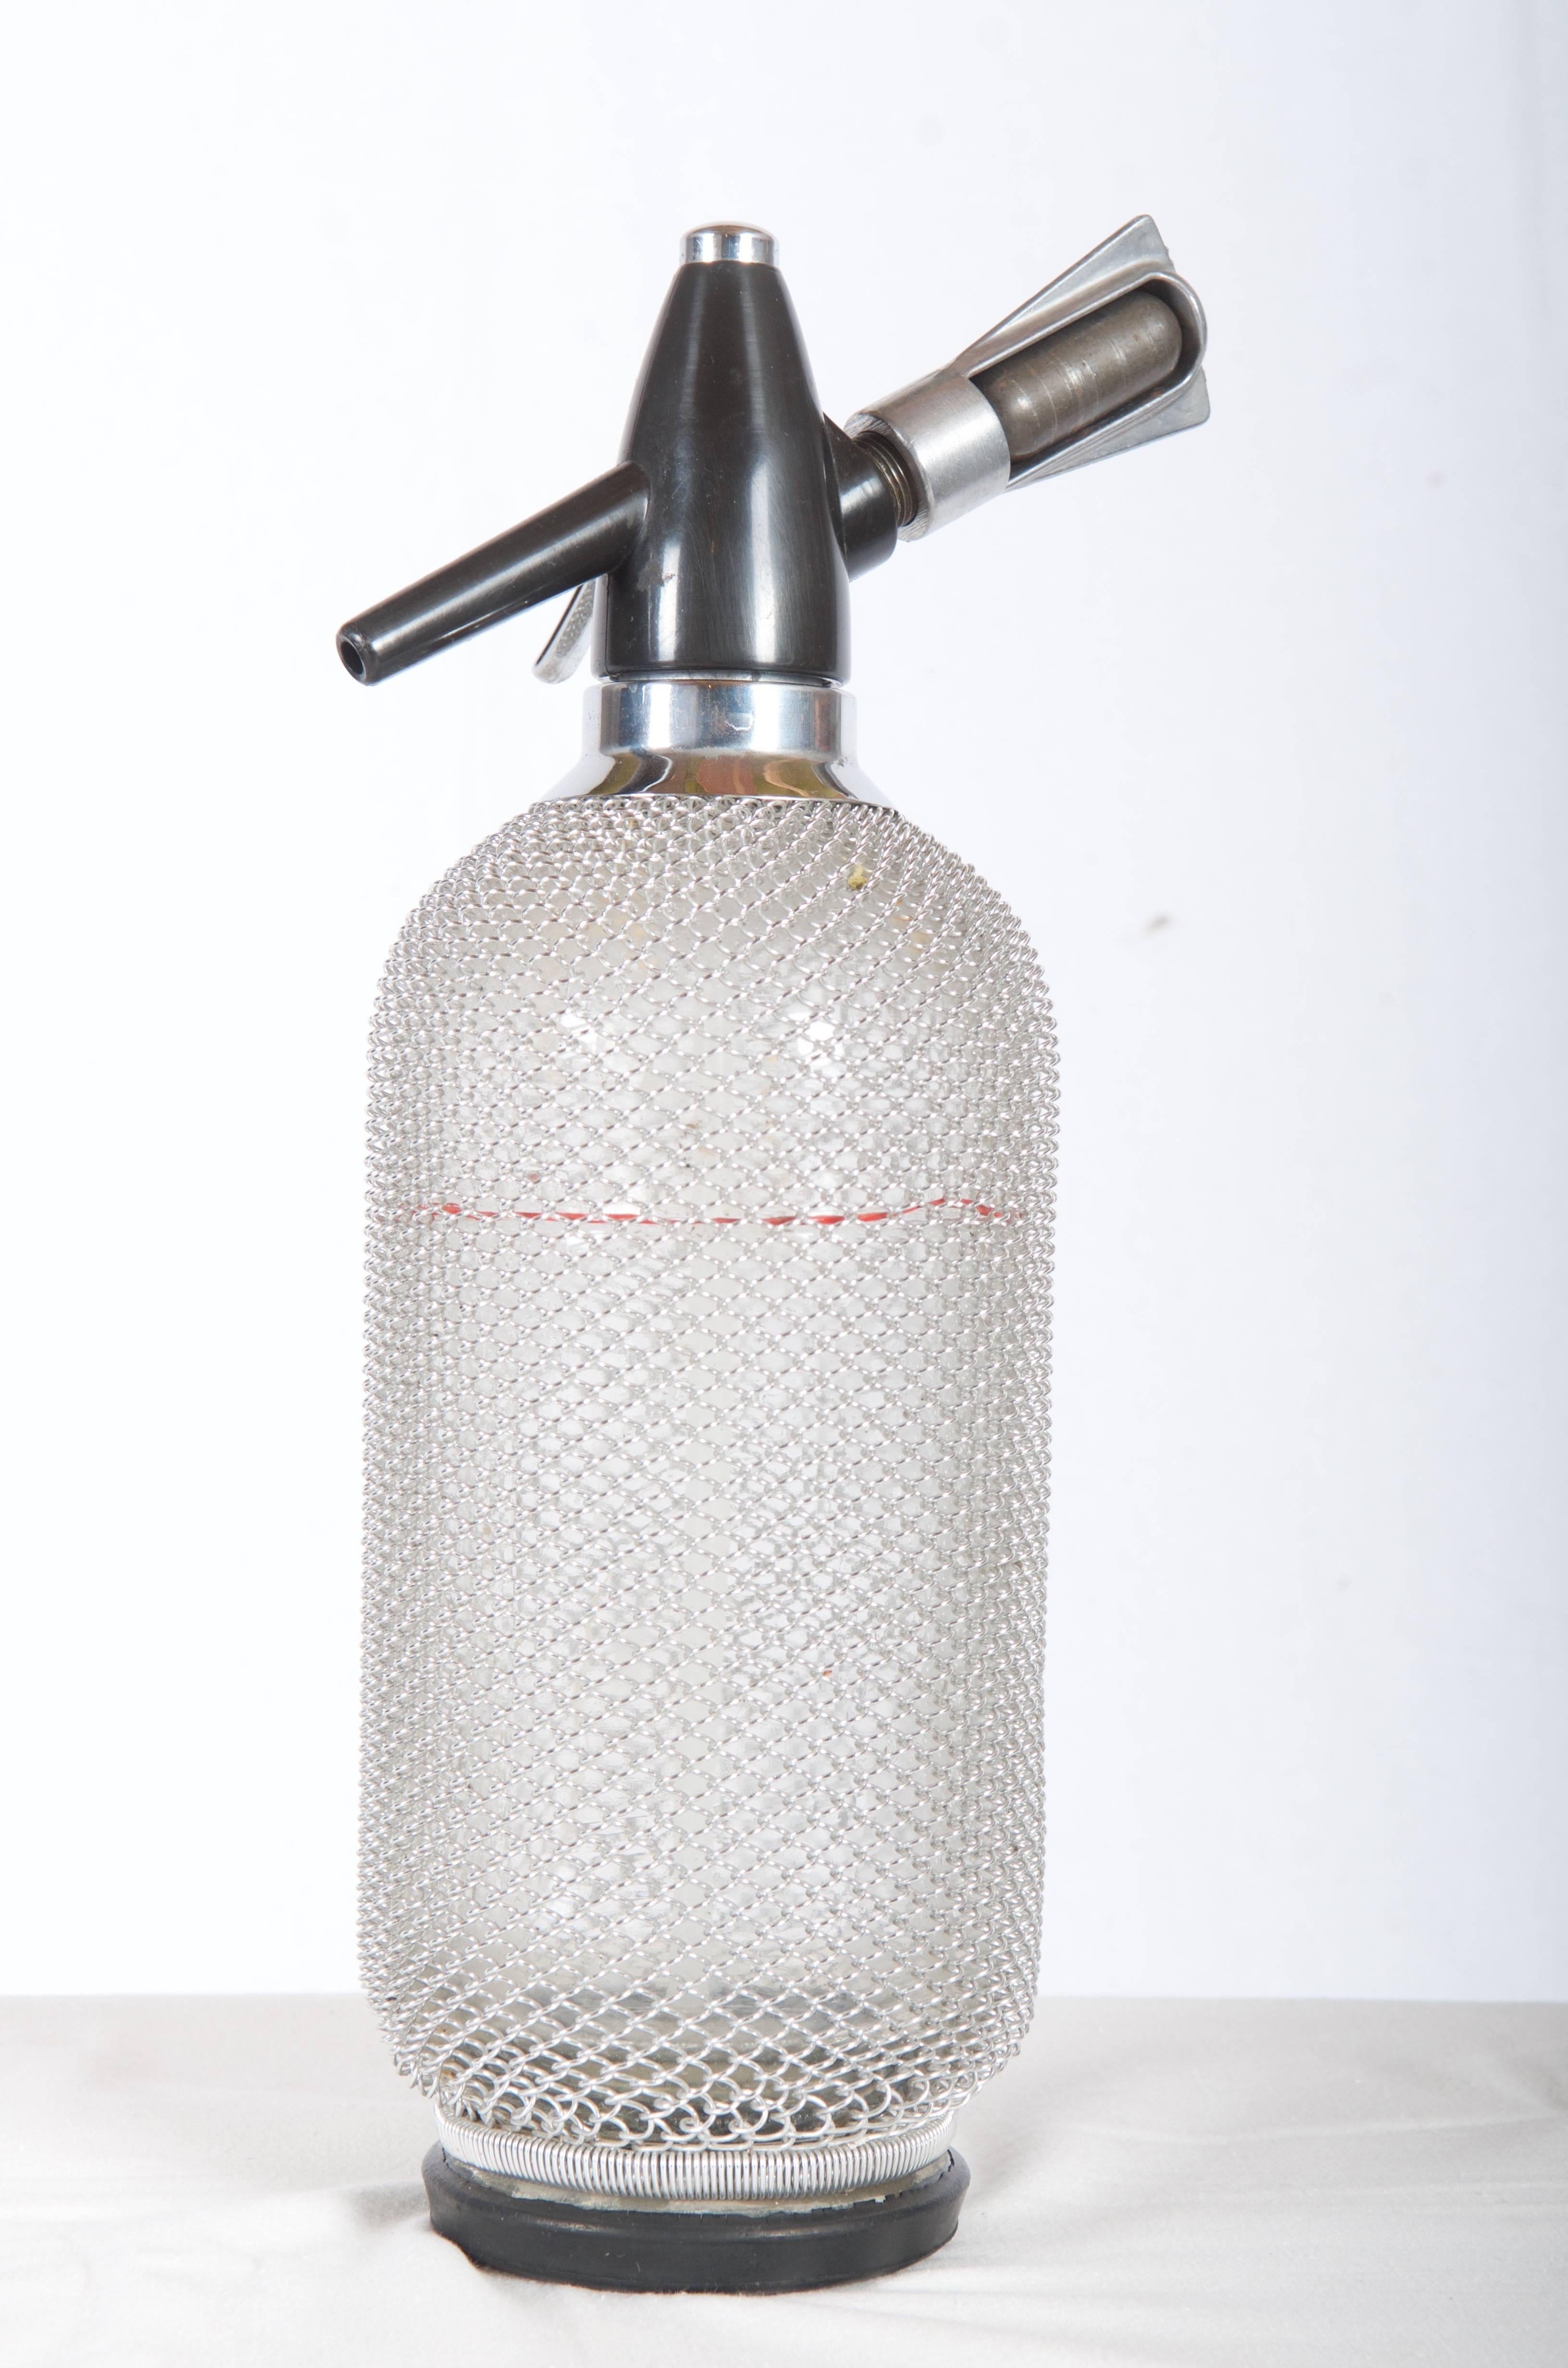 Rare Vintage Glass Siphon Seltzer Soda Bottle  With Wire Mesh from the 1970
The item is in a perfect condition.
Measures: 13 1/2 inches high and 4 inches diameter on the base